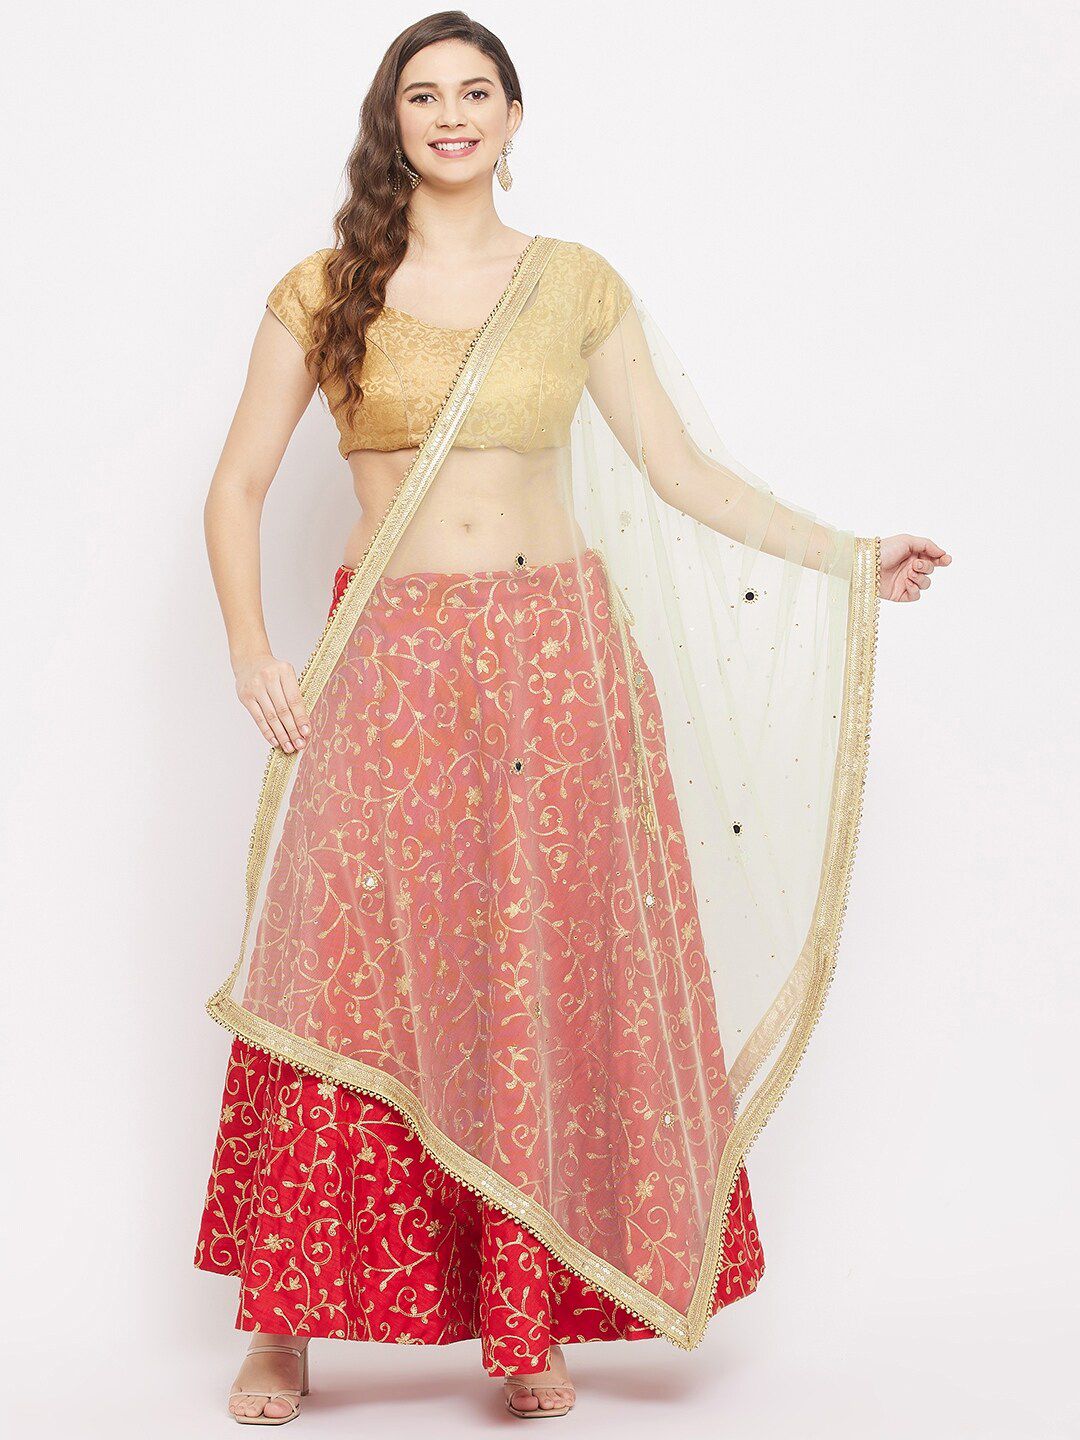 Clora Creation Gold-Toned Ethnic Motifs Embroidered Dupatta with Beads and Stones Price in India